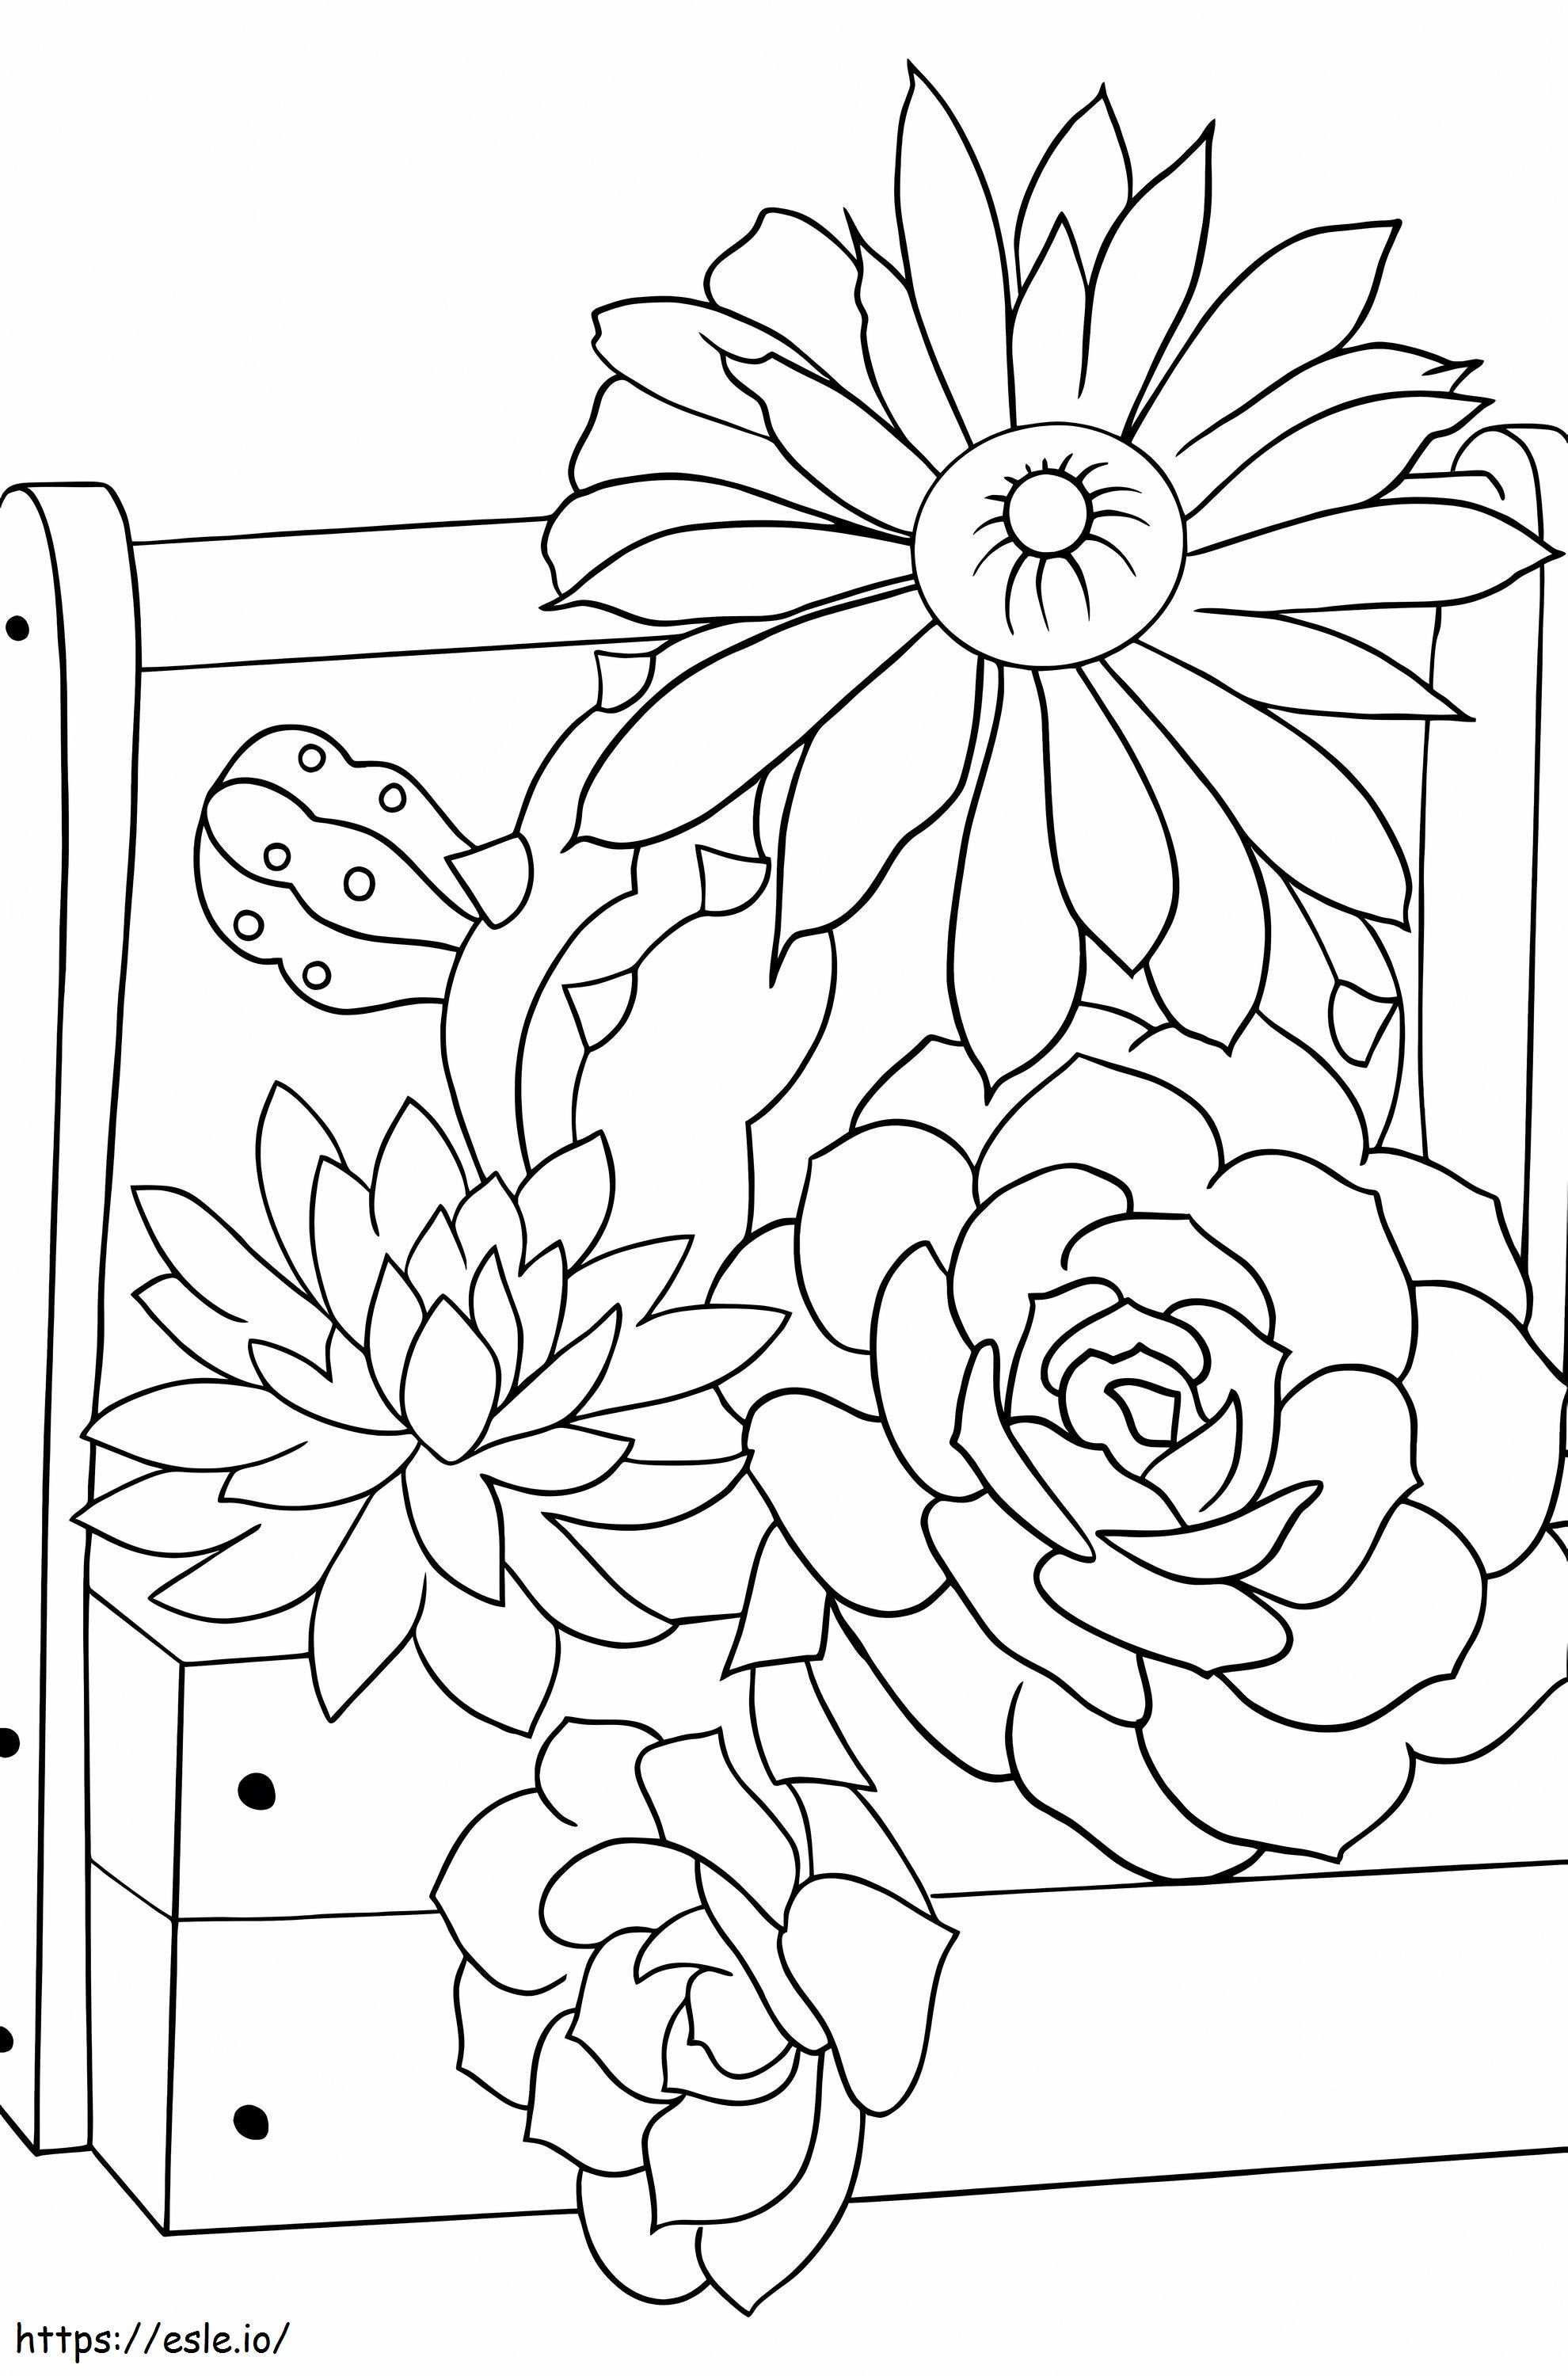 Four Cactus Flowers coloring page